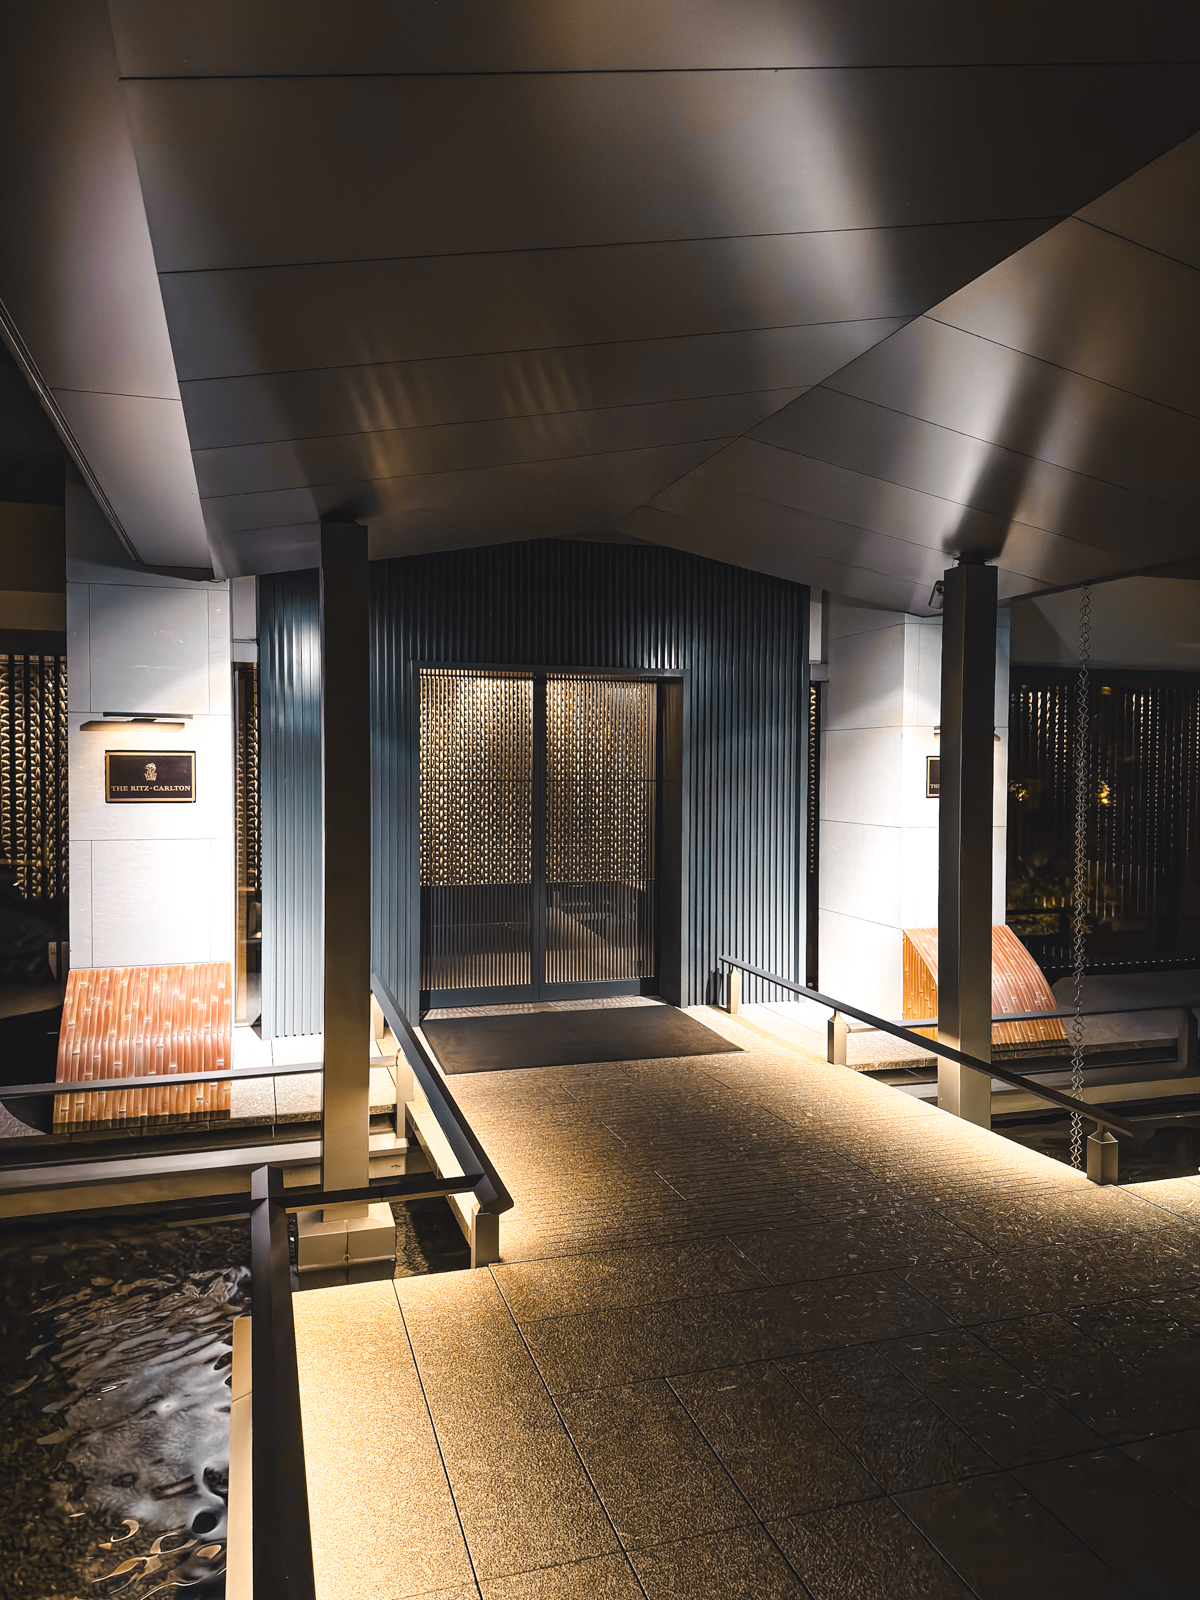 Automatic doors of Ritz-Carlton Kyoto entrance during dusk with lights lighting up the pathway.